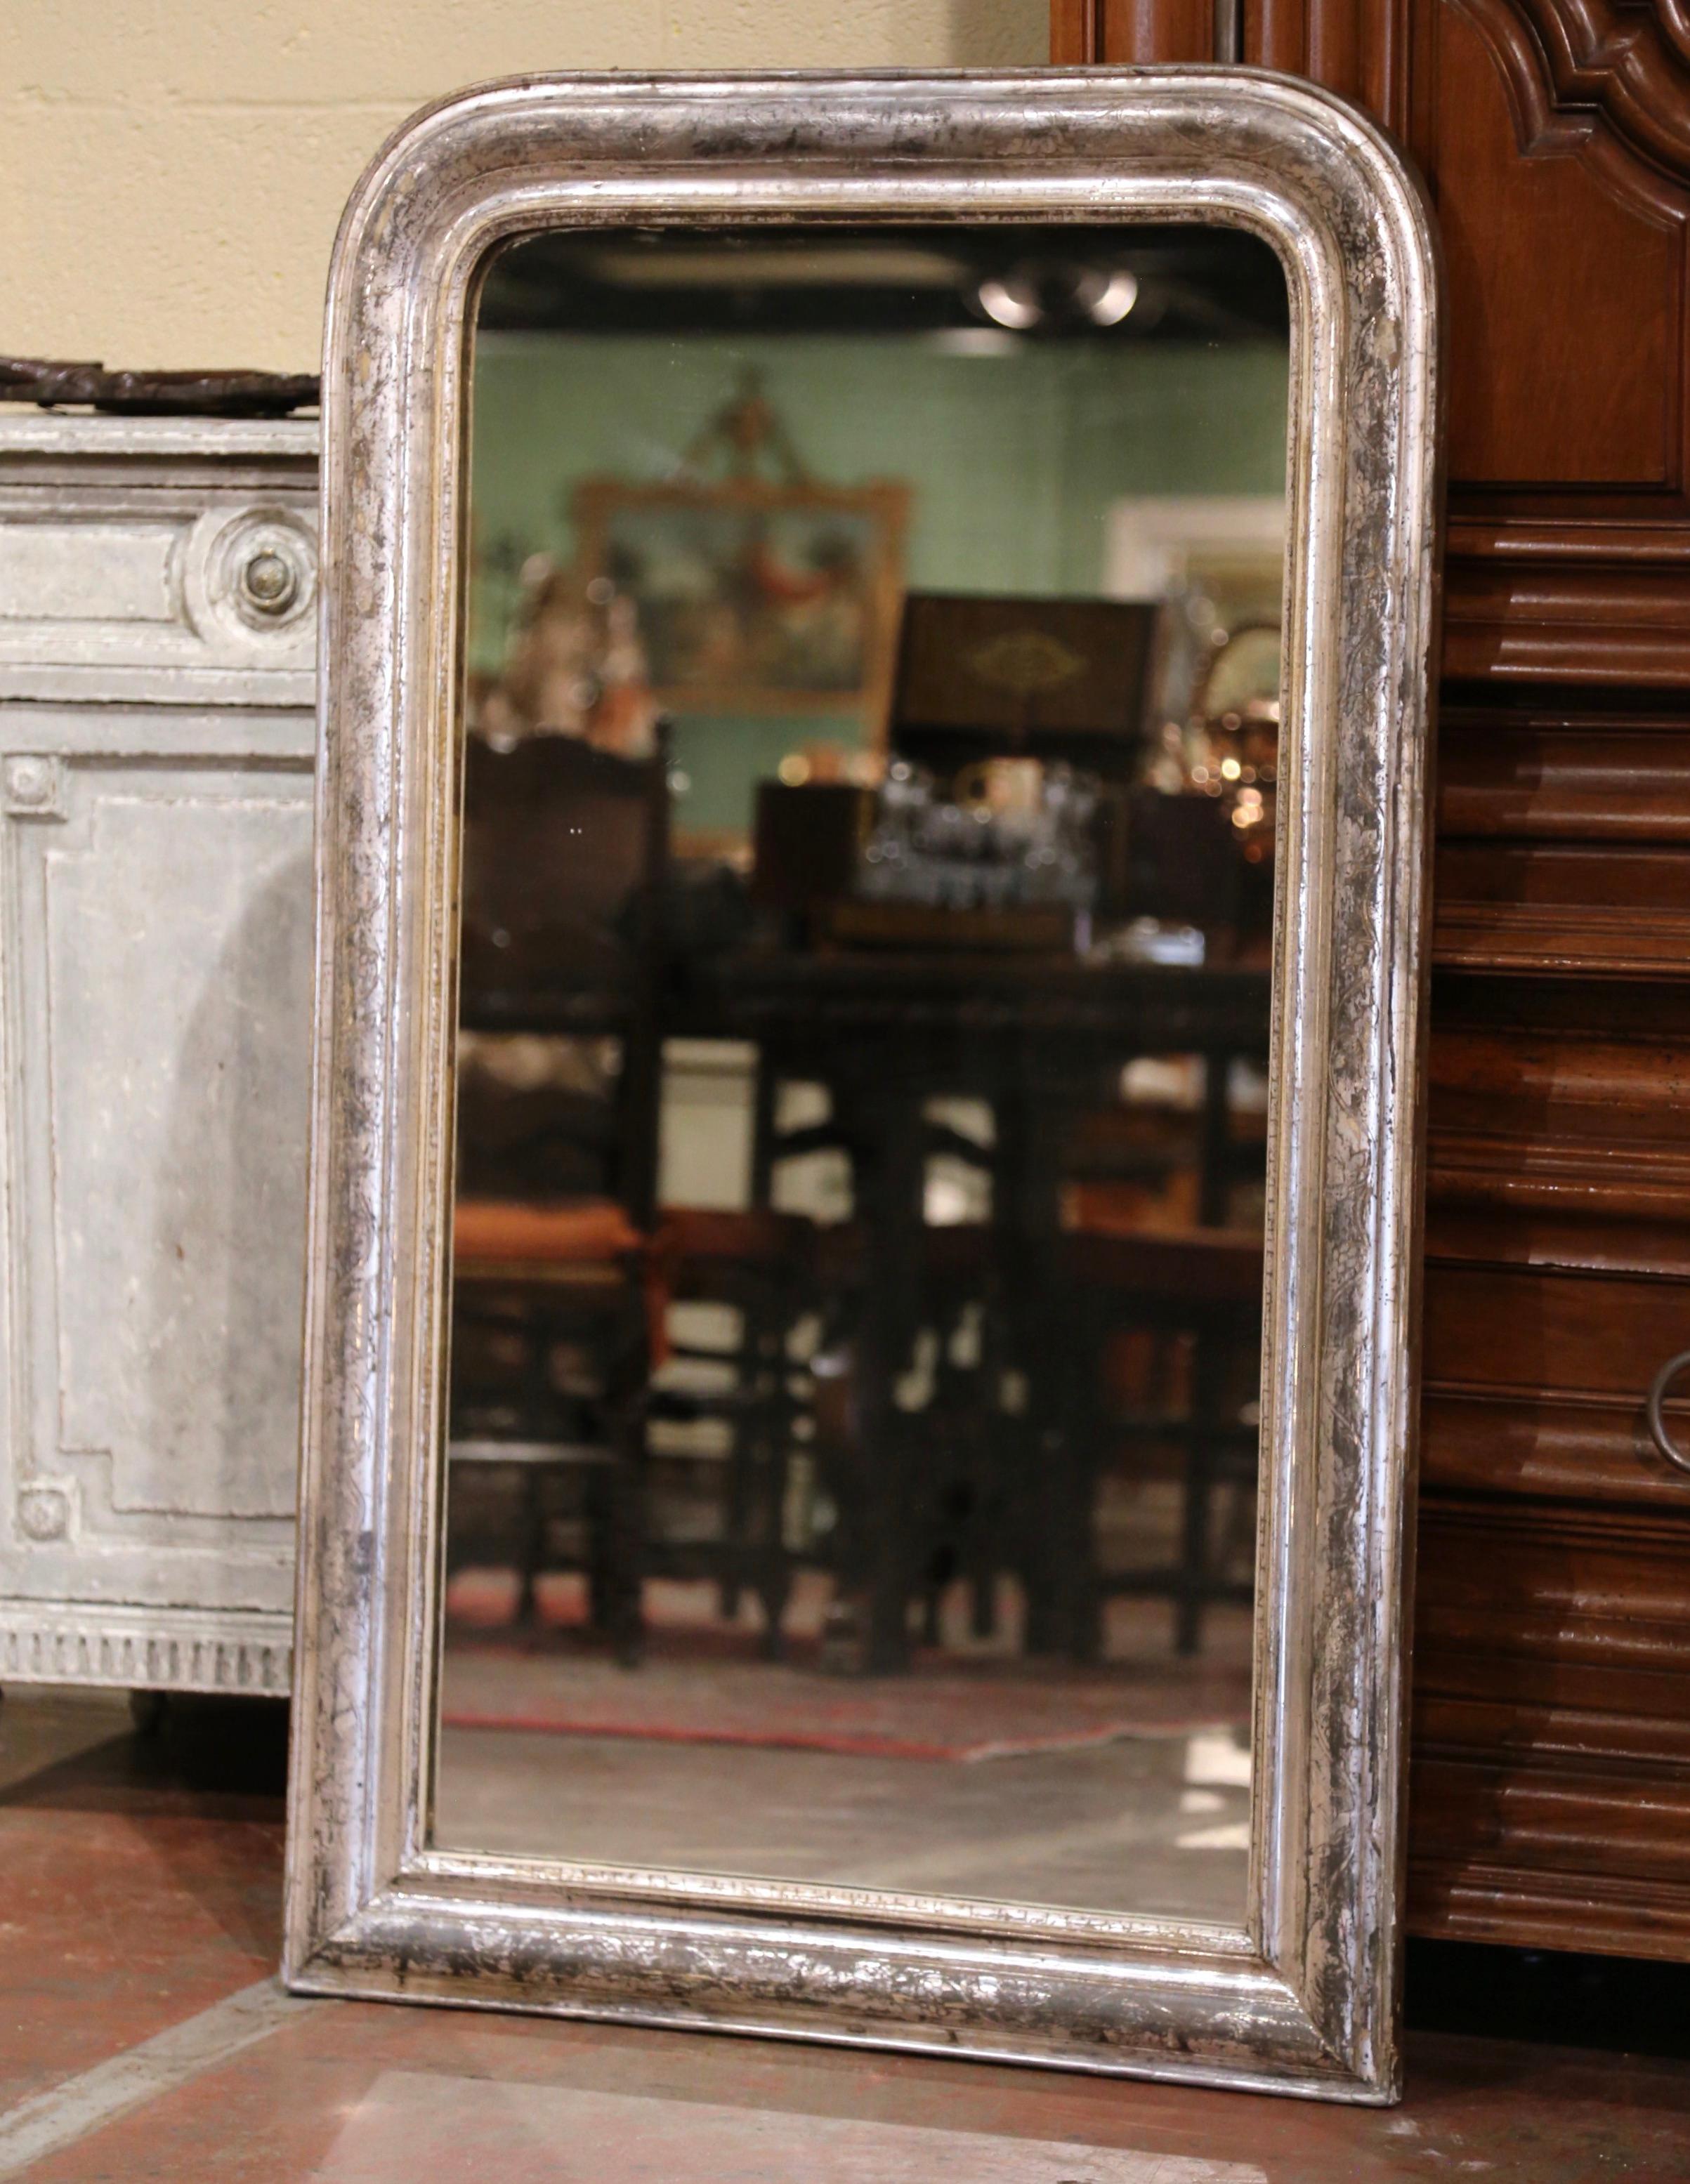 Crafted in the Burgundy region of France, circa 1860, the large antique mirror has traditional, timeless lines with rounded corners. The rectangular frame is decorated with a luxurious silver leaf finish over a discrete engraved two-tone foliage